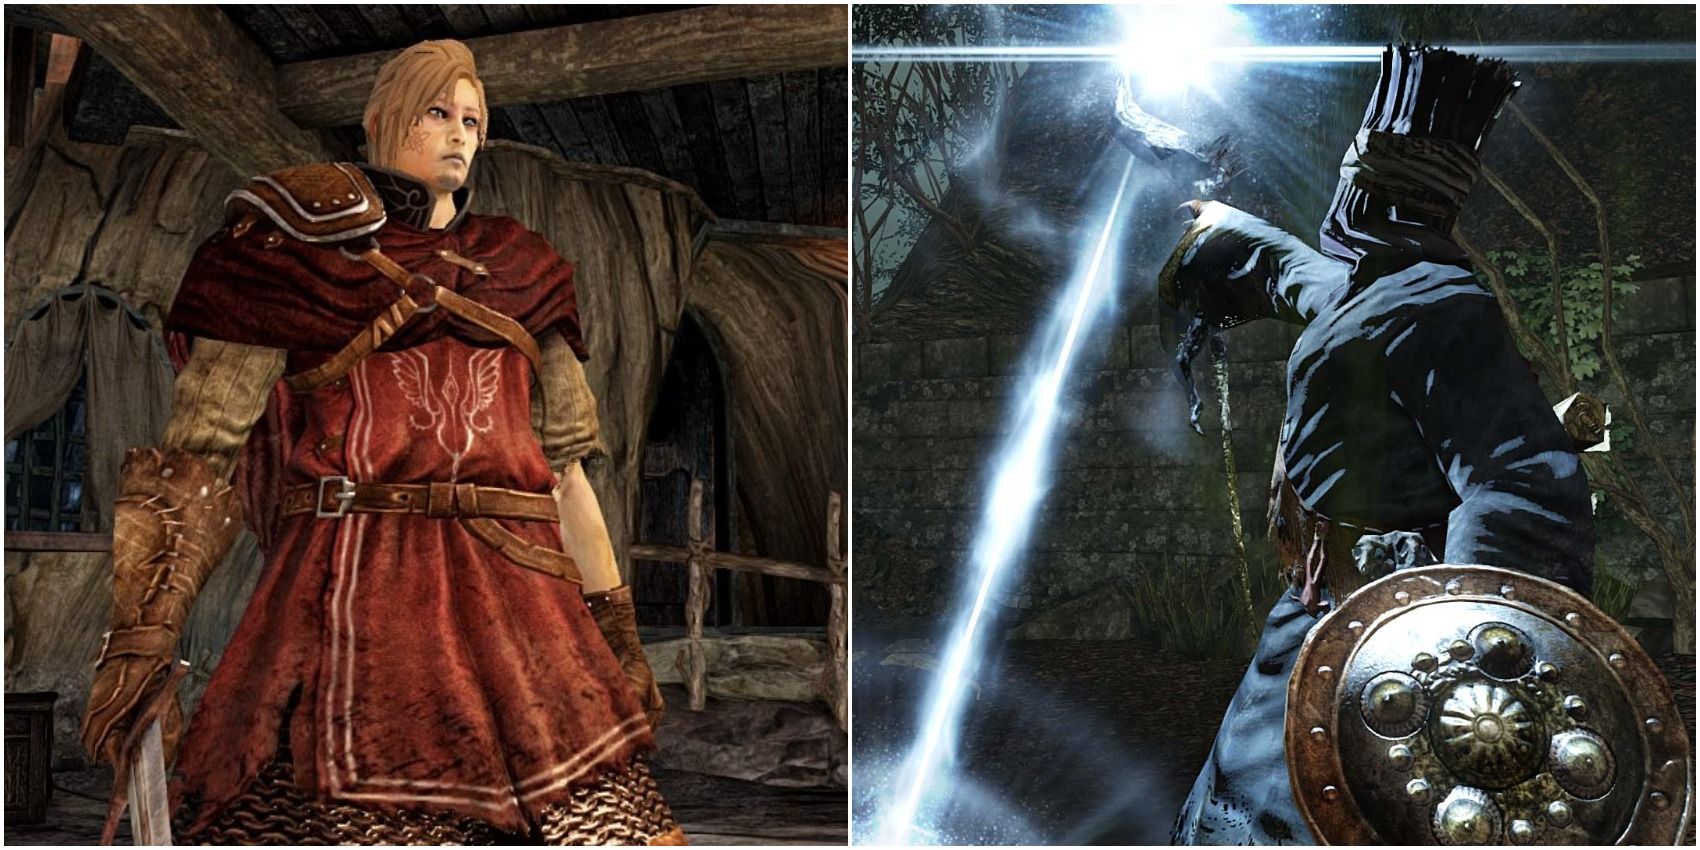 Dark Souls 2 all classes ranked from worst to best. Included are Knight and Sorcerer.